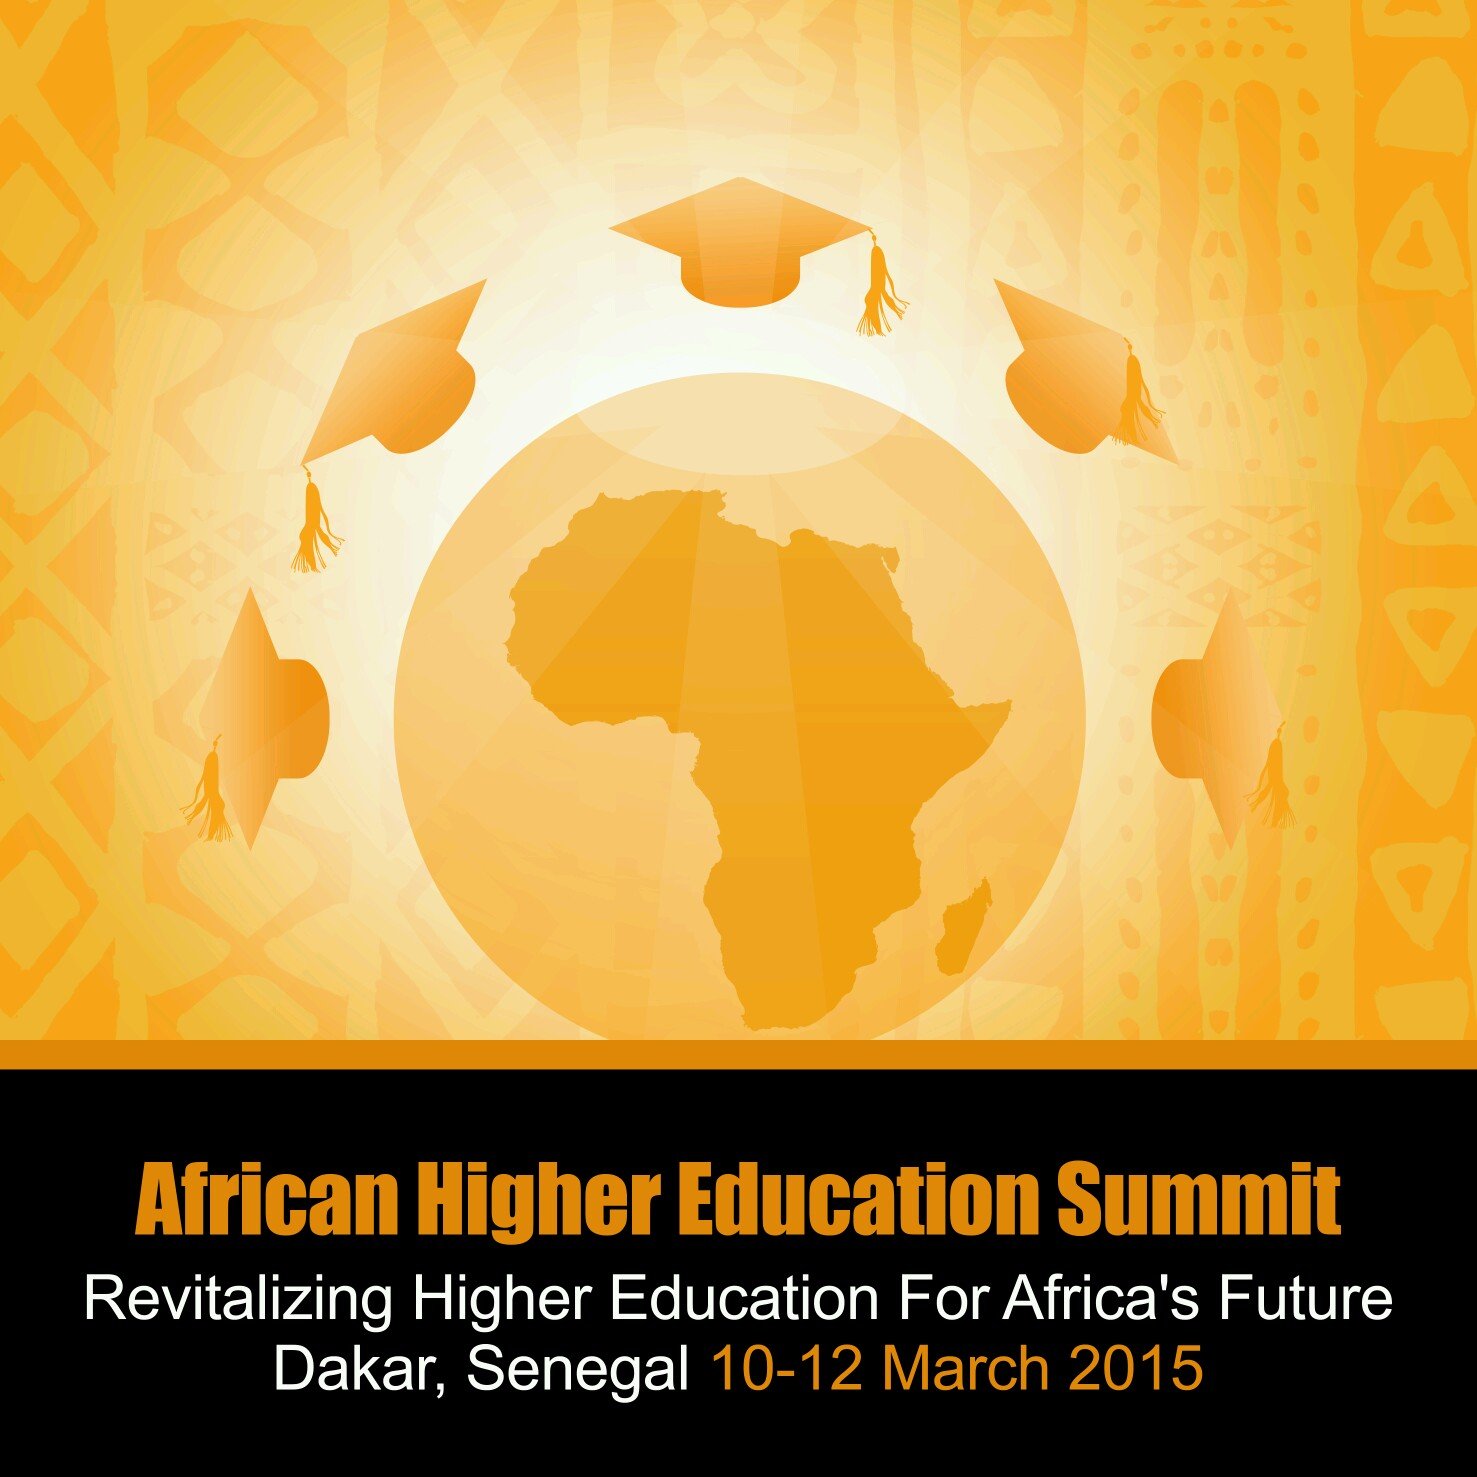 #AHES2015 - Continental summit focusing on African higher education